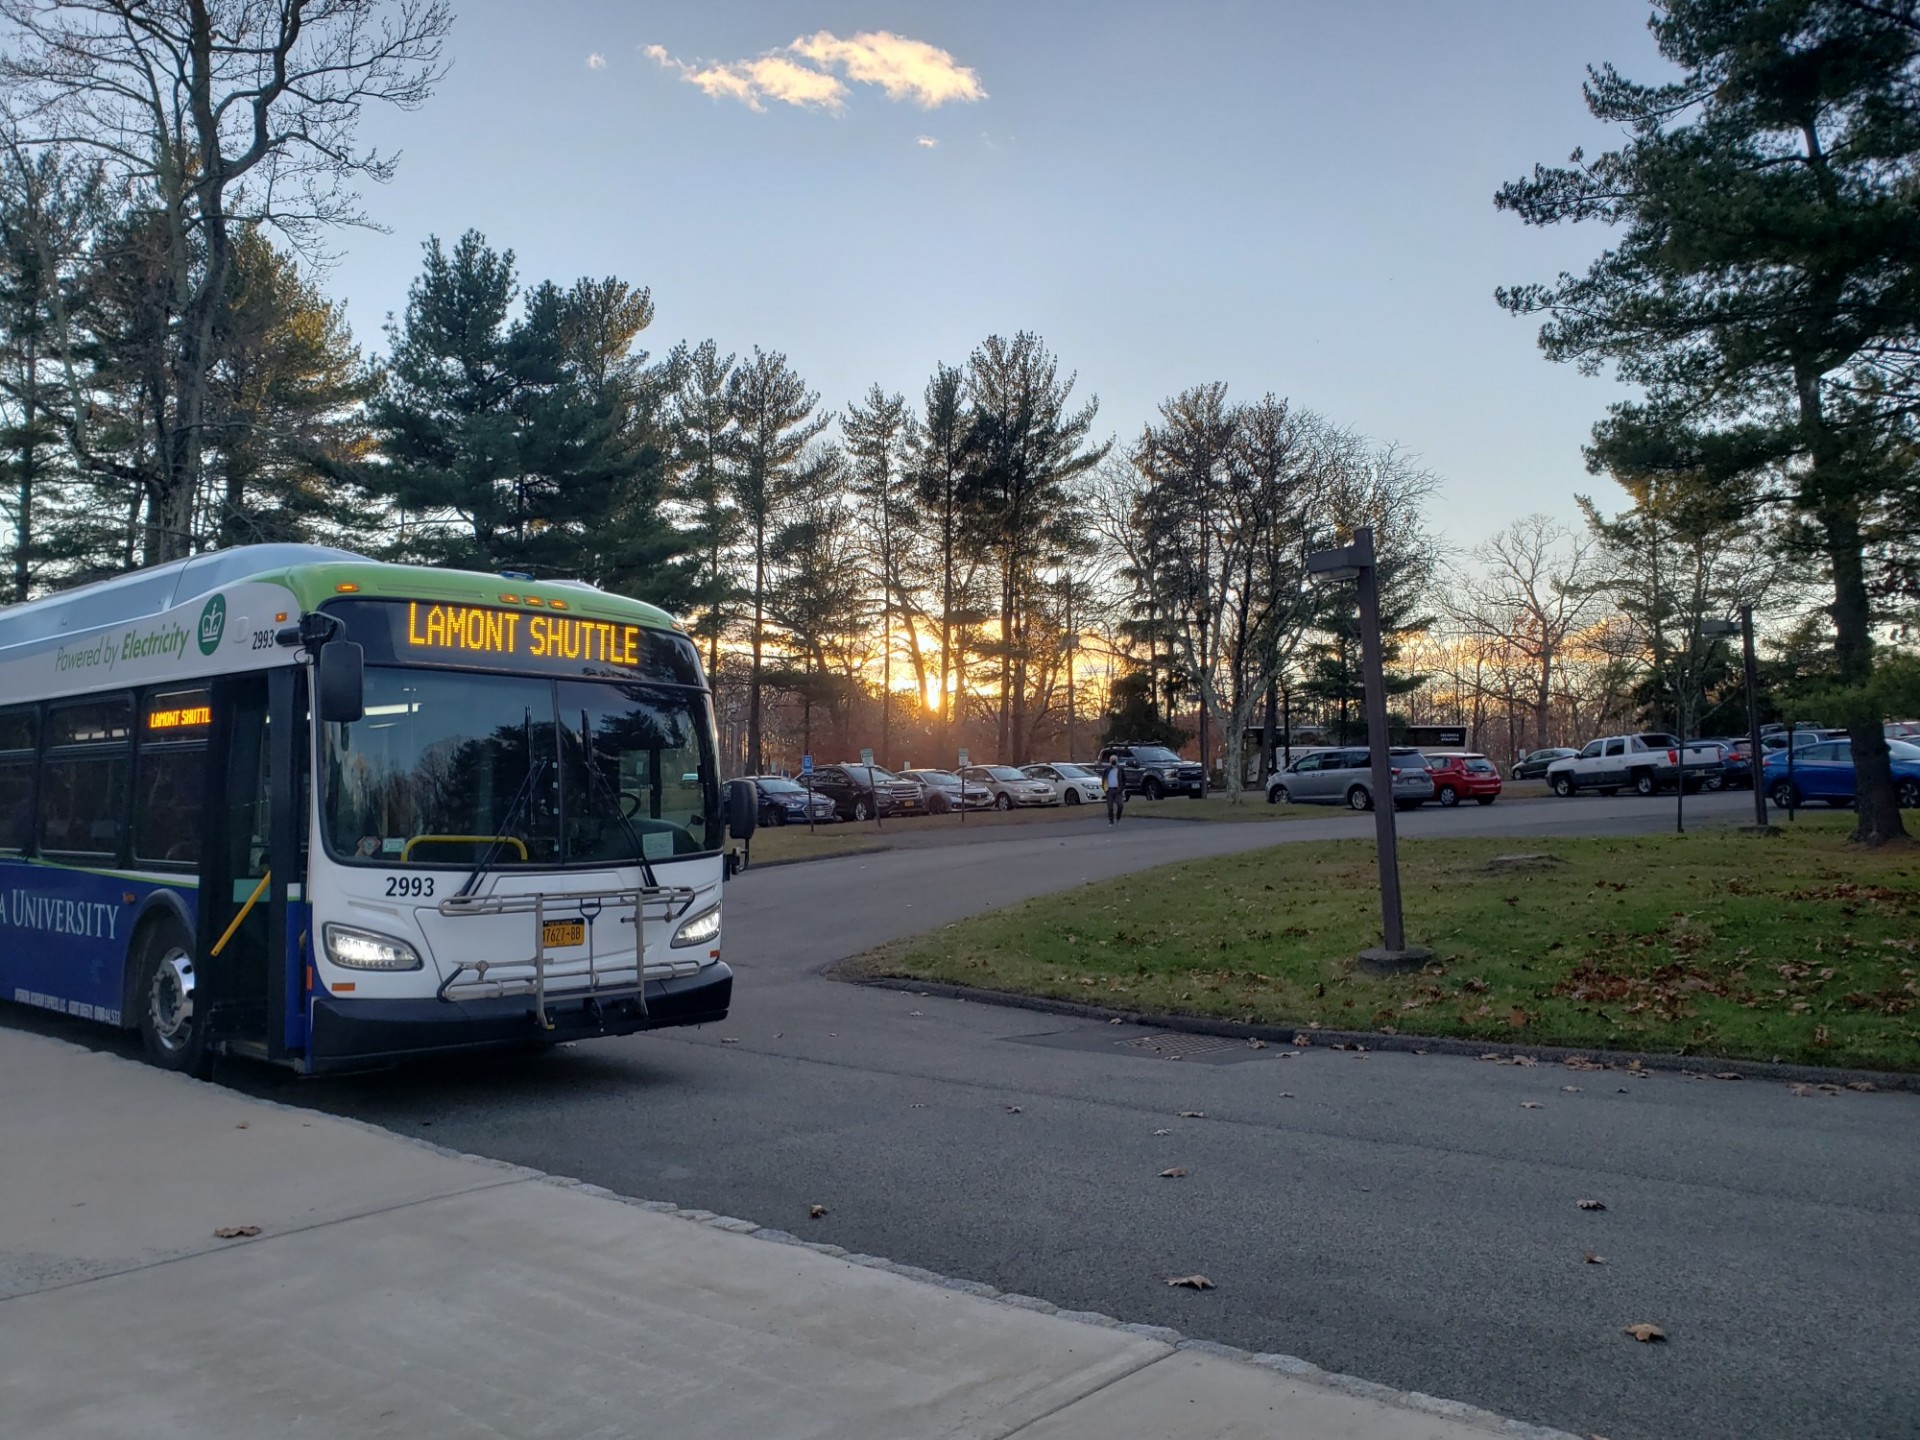 The Lamont shuttle is parked in front of the parking lot at Lamont-Doherty campus on a clear winter evening